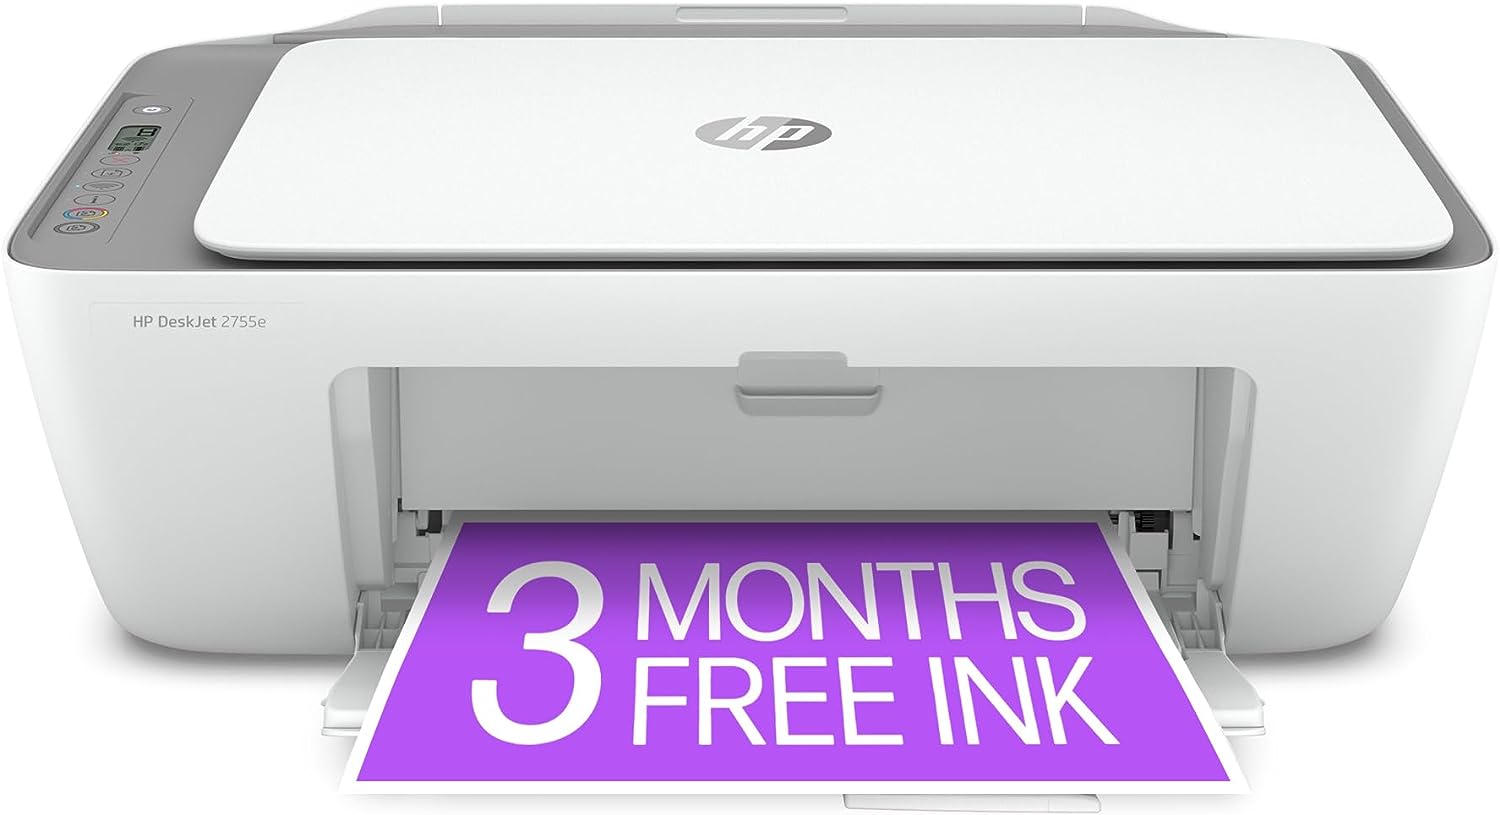 HP DeskJet 2755e Wireless Color All-in-One Printer: The Ultimate Printing Solution